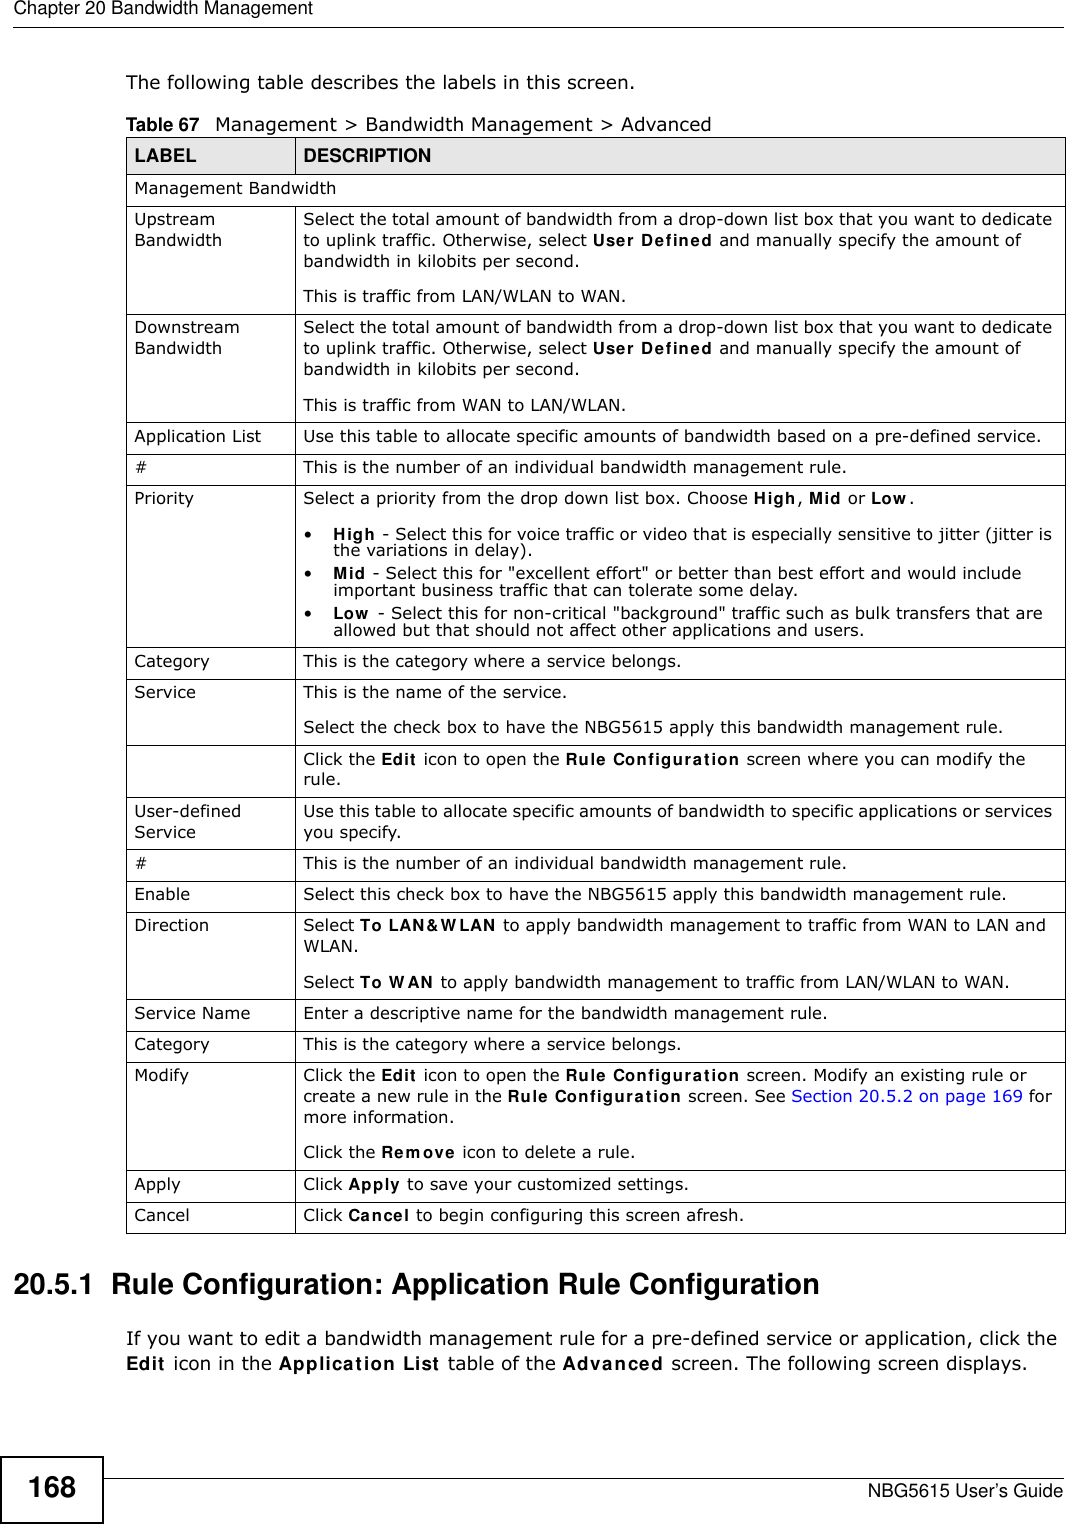 Chapter 20 Bandwidth ManagementNBG5615 User’s Guide168The following table describes the labels in this screen.20.5.1  Rule Configuration: Application Rule Configuration    If you want to edit a bandwidth management rule for a pre-defined service or application, click the Edit icon in the Application List table of the Advanced screen. The following screen displays.Table 67   Management &gt; Bandwidth Management &gt; Advanced LABEL DESCRIPTIONManagement BandwidthUpstream BandwidthSelect the total amount of bandwidth from a drop-down list box that you want to dedicate to uplink traffic. Otherwise, select User Defined and manually specify the amount of bandwidth in kilobits per second.This is traffic from LAN/WLAN to WAN.Downstream BandwidthSelect the total amount of bandwidth from a drop-down list box that you want to dedicate to uplink traffic. Otherwise, select User Defined and manually specify the amount of bandwidth in kilobits per second.This is traffic from WAN to LAN/WLAN.Application List Use this table to allocate specific amounts of bandwidth based on a pre-defined service.#This is the number of an individual bandwidth management rule.Priority Select a priority from the drop down list box. Choose High, Mid or Low .•High - Select this for voice traffic or video that is especially sensitive to jitter (jitter is the variations in delay).•Mid - Select this for &quot;excellent effort&quot; or better than best effort and would include important business traffic that can tolerate some delay.•Low  - Select this for non-critical &quot;background&quot; traffic such as bulk transfers that are allowed but that should not affect other applications and users. Category This is the category where a service belongs.Service This is the name of the service.Select the check box to have the NBG5615 apply this bandwidth management rule. Click the Edit icon to open the Rule Configuration screen where you can modify the rule.User-defined Service Use this table to allocate specific amounts of bandwidth to specific applications or services you specify.#This is the number of an individual bandwidth management rule.Enable Select this check box to have the NBG5615 apply this bandwidth management rule.Direction  Select To LAN&amp;W LAN to apply bandwidth management to traffic from WAN to LAN and WLAN. Select To W AN to apply bandwidth management to traffic from LAN/WLAN to WAN. Service Name Enter a descriptive name for the bandwidth management rule.Category This is the category where a service belongs.Modify Click the Edit icon to open the Rule Configuration screen. Modify an existing rule or create a new rule in the Rule Configuration screen. See Section 20.5.2 on page 169 for more information.Click the Rem ove icon to delete a rule.Apply Click Apply to save your customized settings.Cancel Click Cancel to begin configuring this screen afresh.